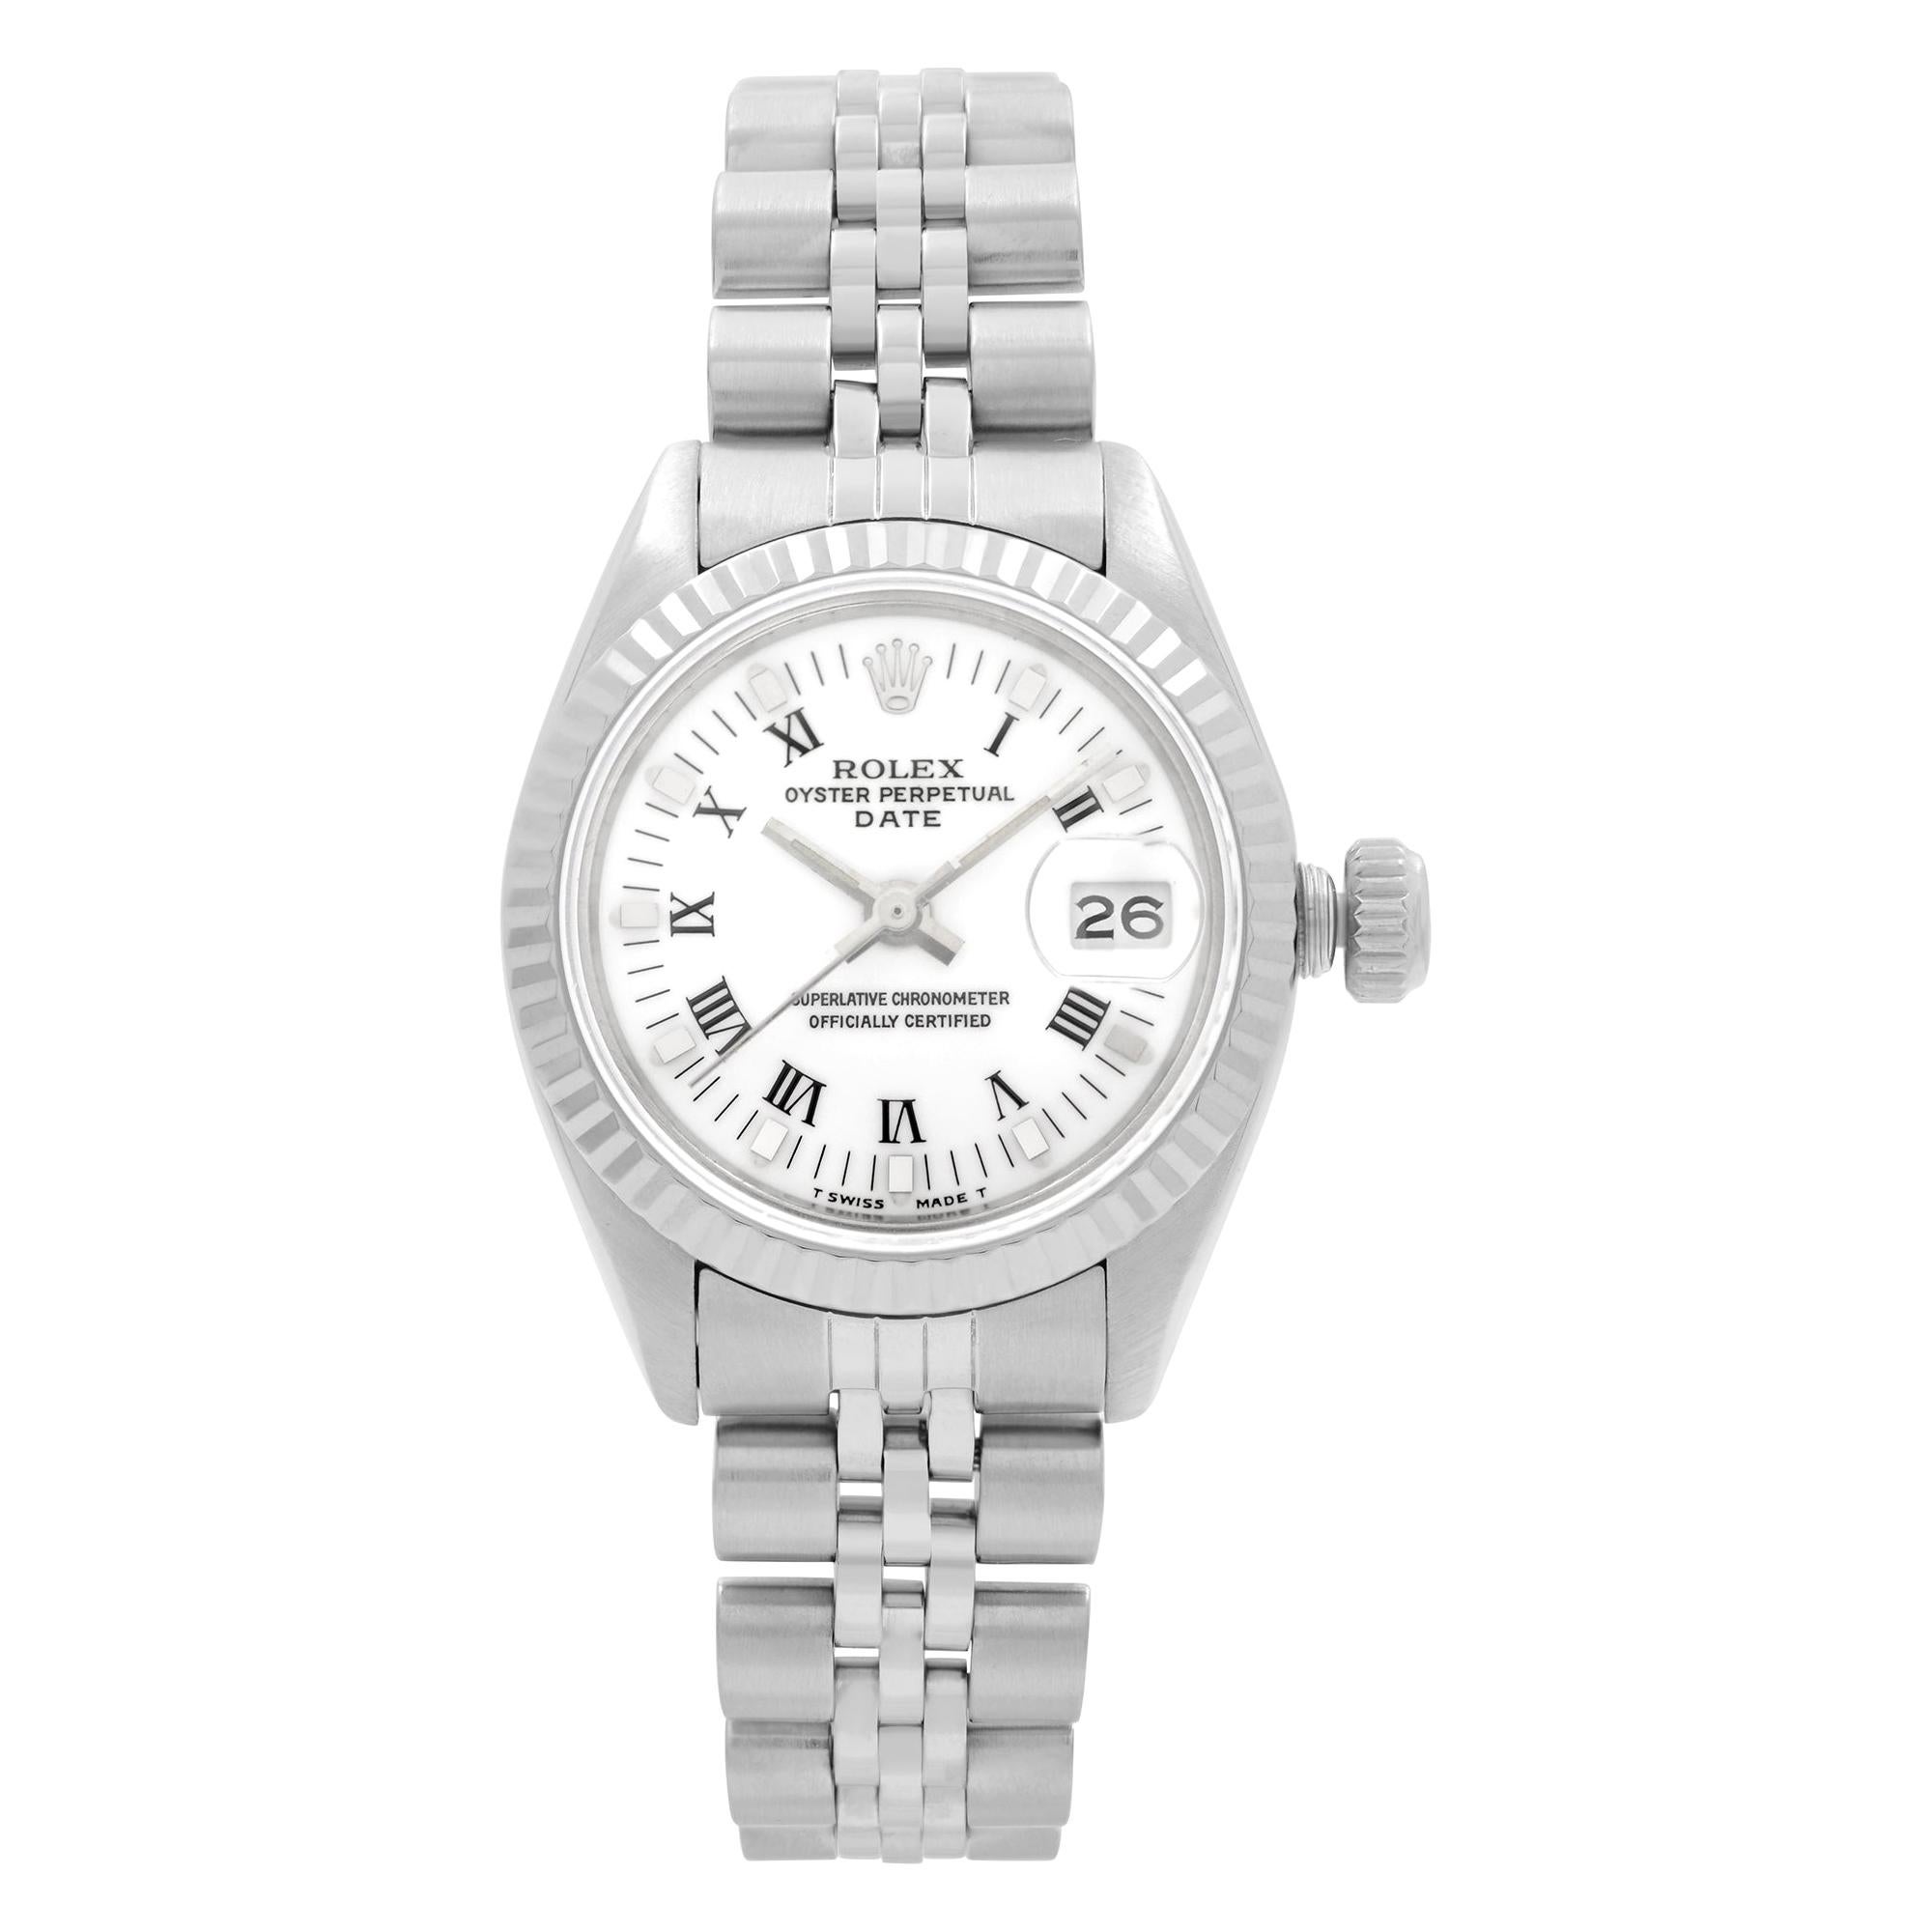 Rolex Datejust 18k White Gold Steel White Dial Automatic Ladies Watch 6917